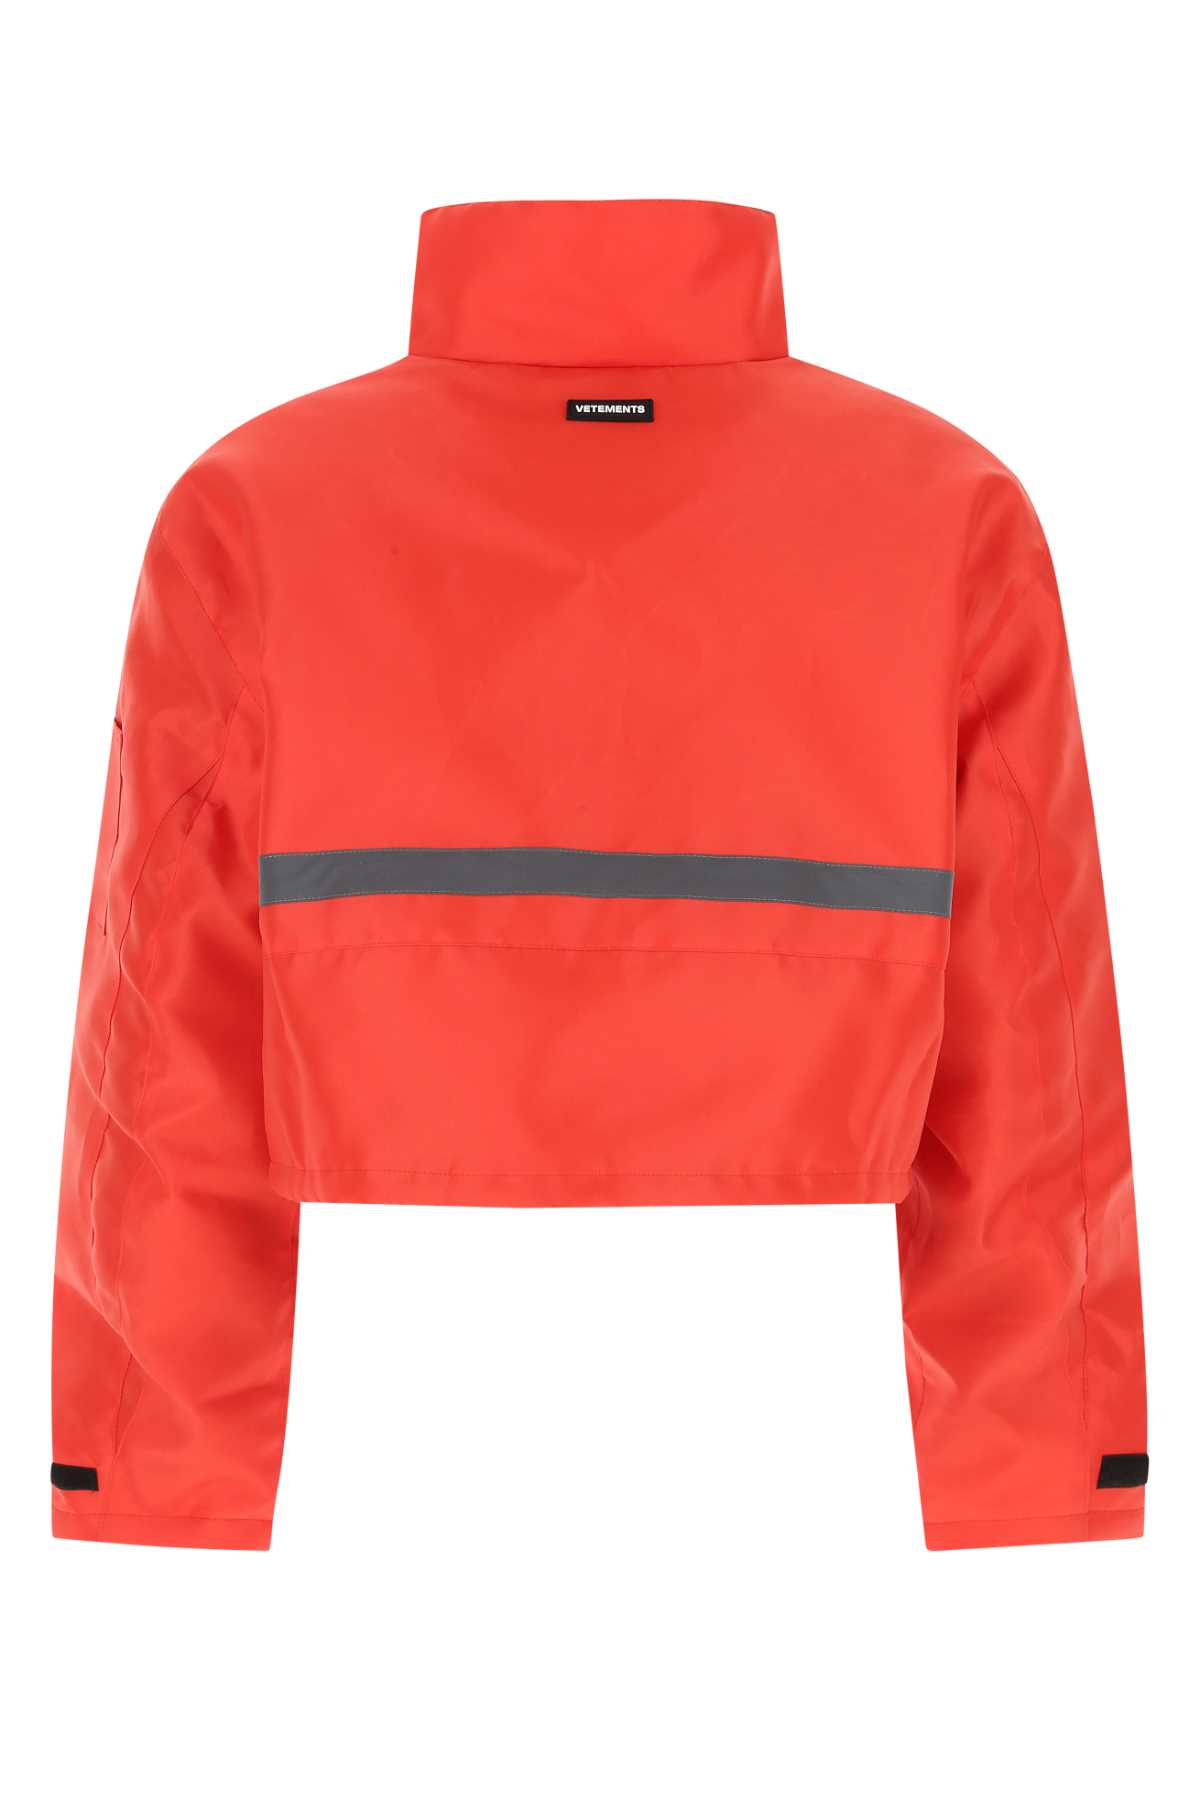 Shop Vetements Red Polyester Padded Jacket